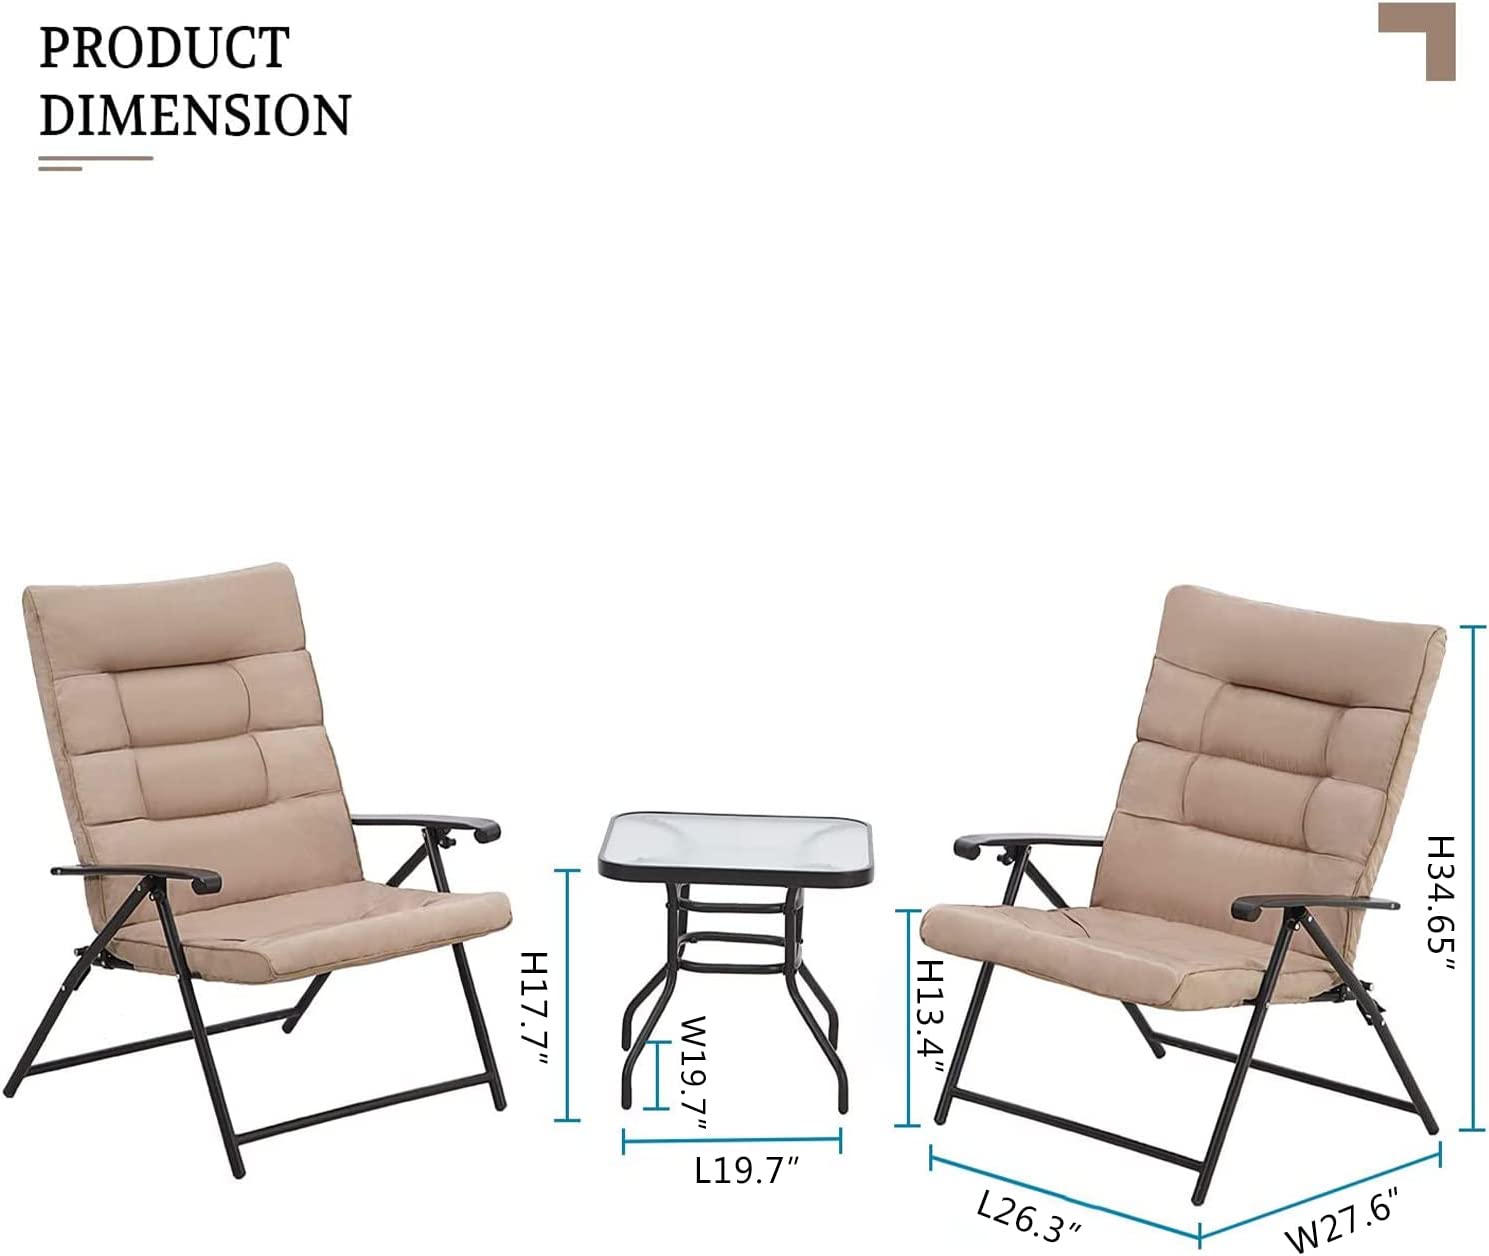 Suncrown Patio Padded Folding 3 Pieces Chair Set for 2 Adjustable Reclining Outdoor Furniture Metal Sling Chair with Coffee Table - image 3 of 6